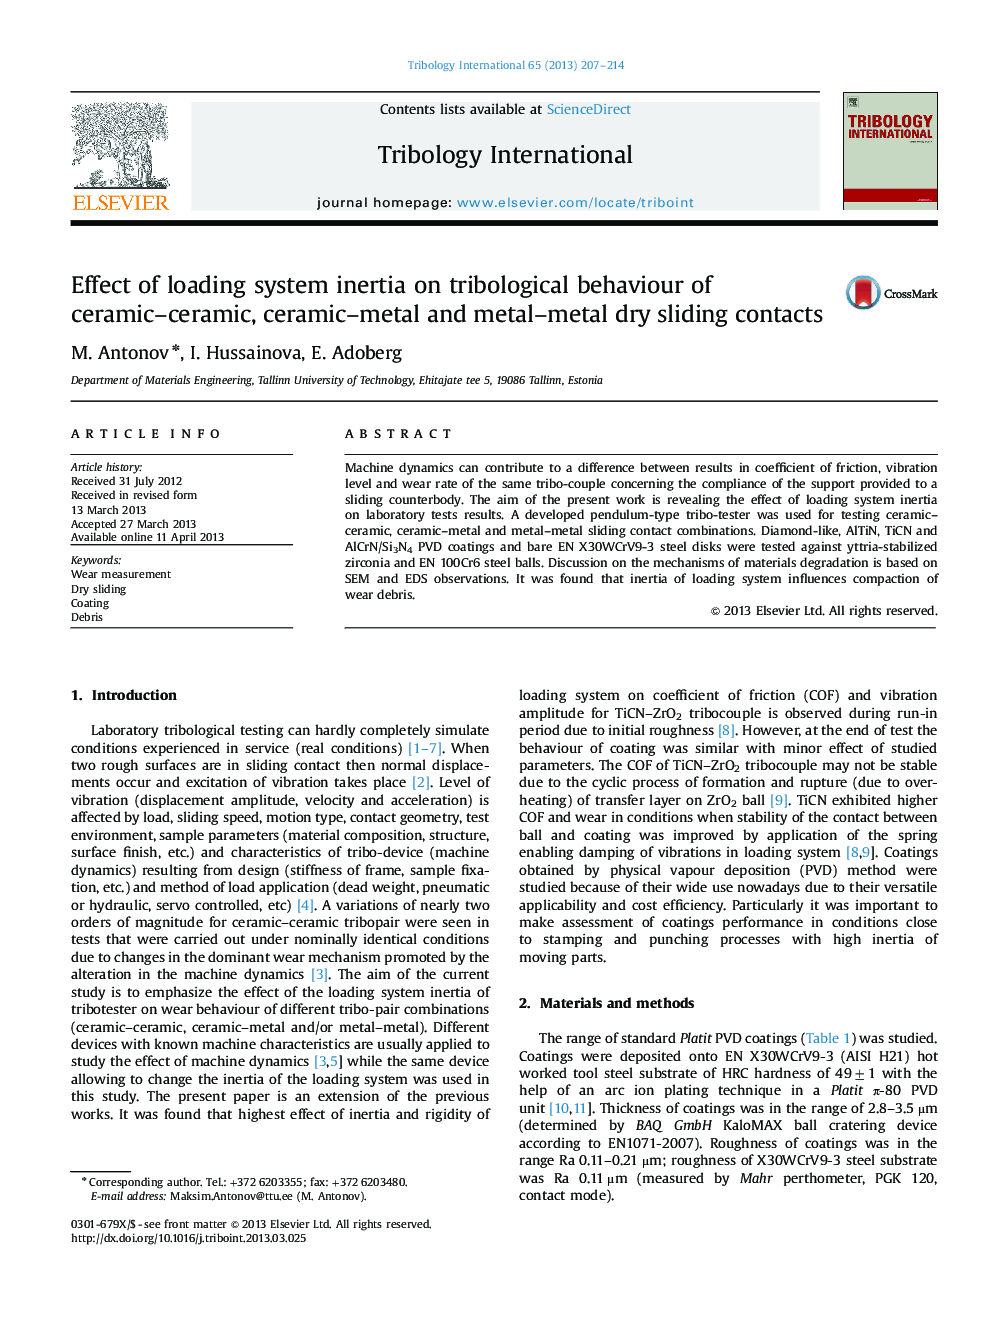 Effect of loading system inertia on tribological behaviour of ceramic–ceramic, ceramic–metal and metal–metal dry sliding contacts